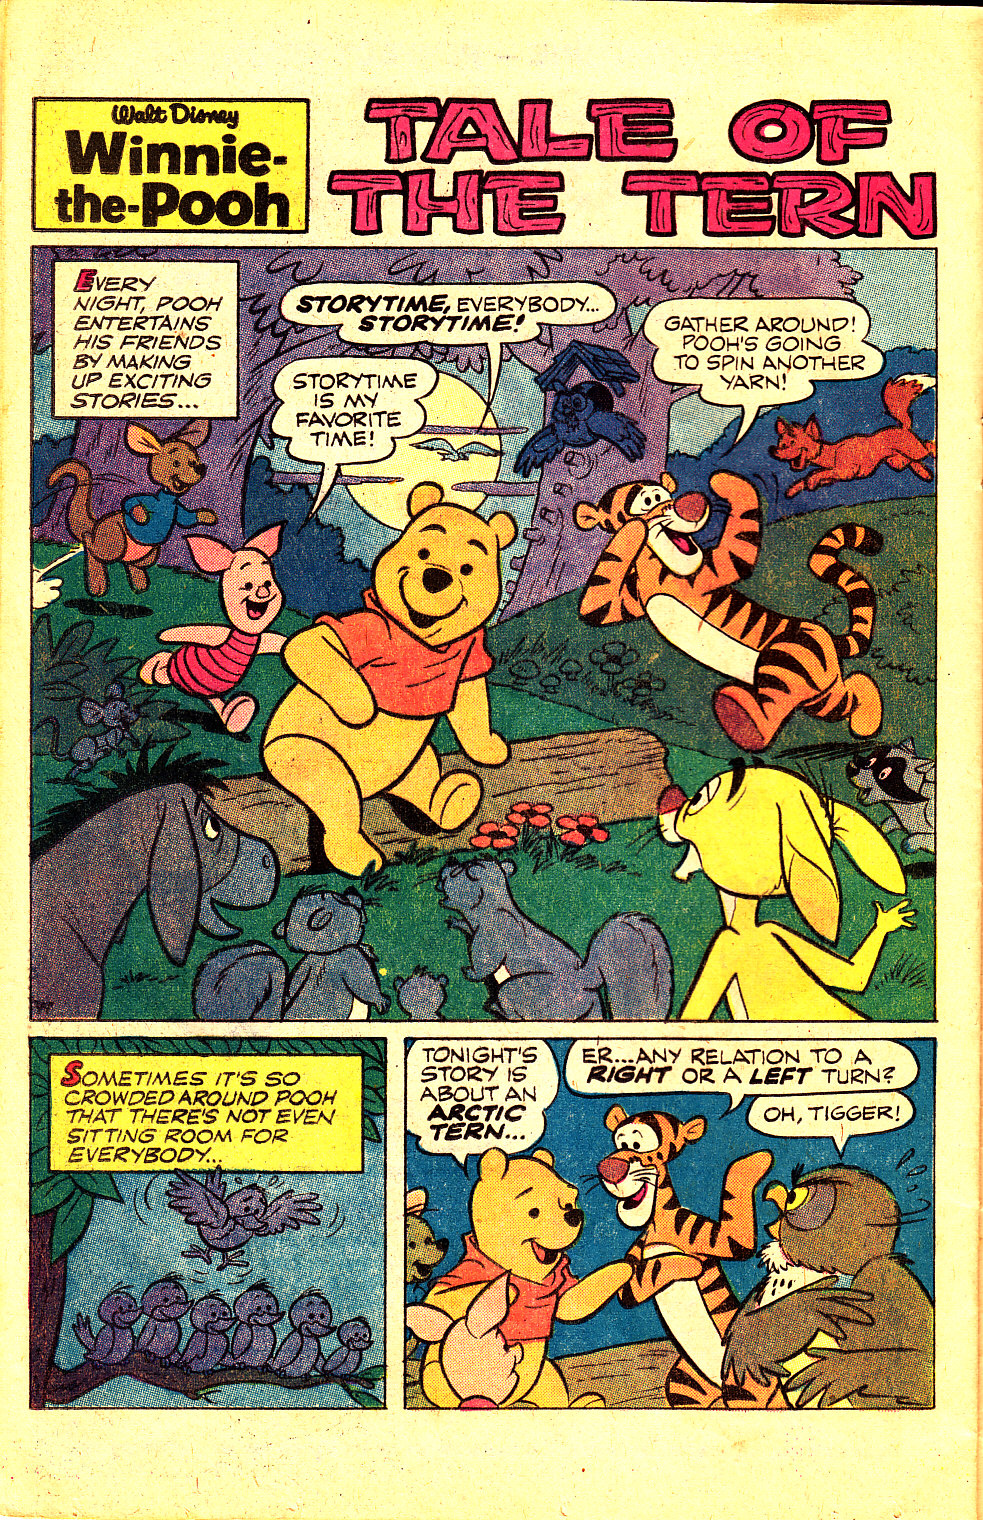 Read online Winnie-the-Pooh comic -  Issue #20 - 24